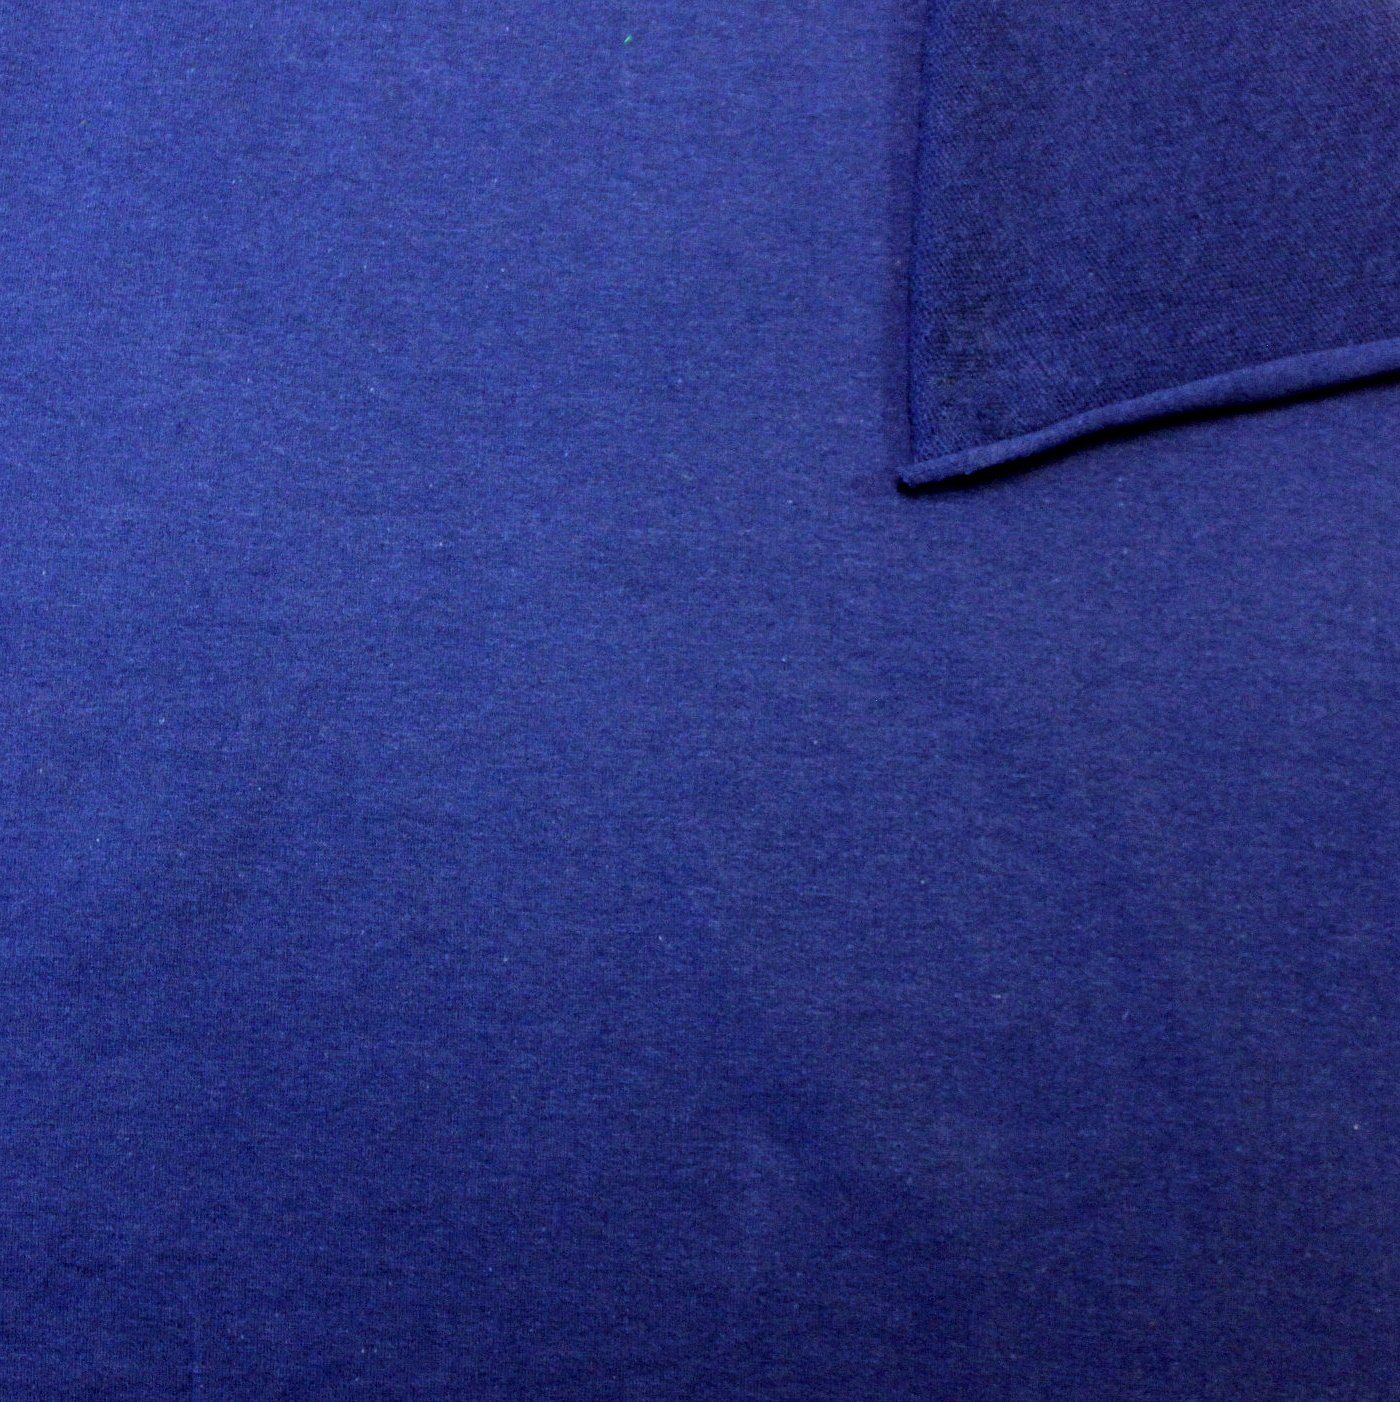 Solid Royal Blue 4 Way Stretch French Terry Knit Fabric With Spandex Fabric, Raspberry Creek Fabrics, watermarked, restored